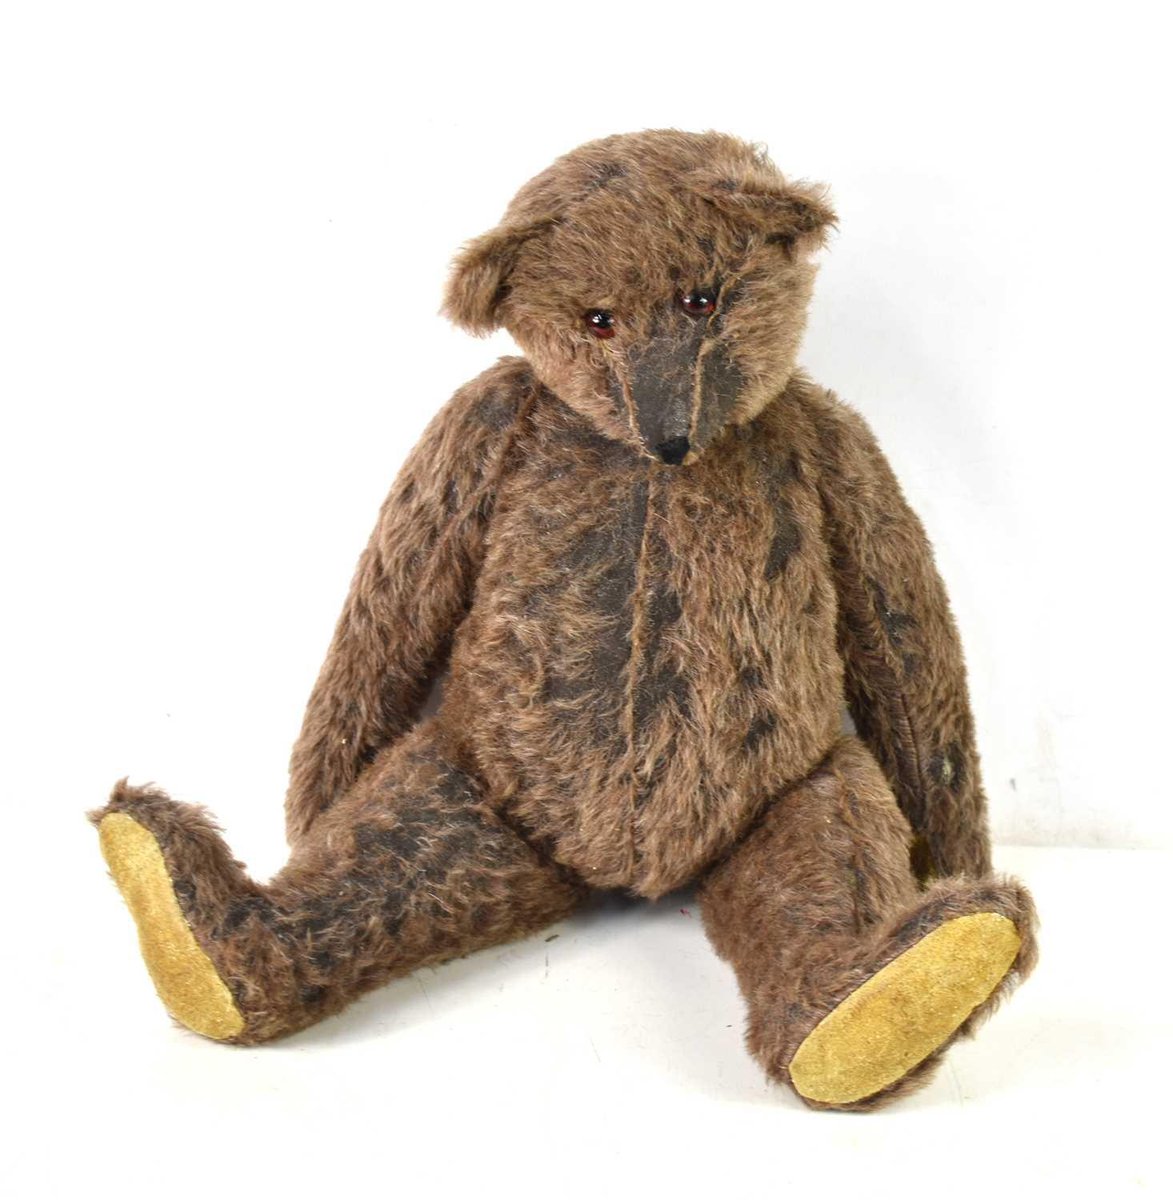 Ready to meet a vintage charmer? 🧸 Check out Lot 415 at Stamford Auction Rooms on May 25: a Steiff-style, straw-filled teddy bear, waiting for a new home. Don't miss out! 🐻💼 Bid here: tinyurl.com/3t99skad #VintageCollectibles #ToyAuction